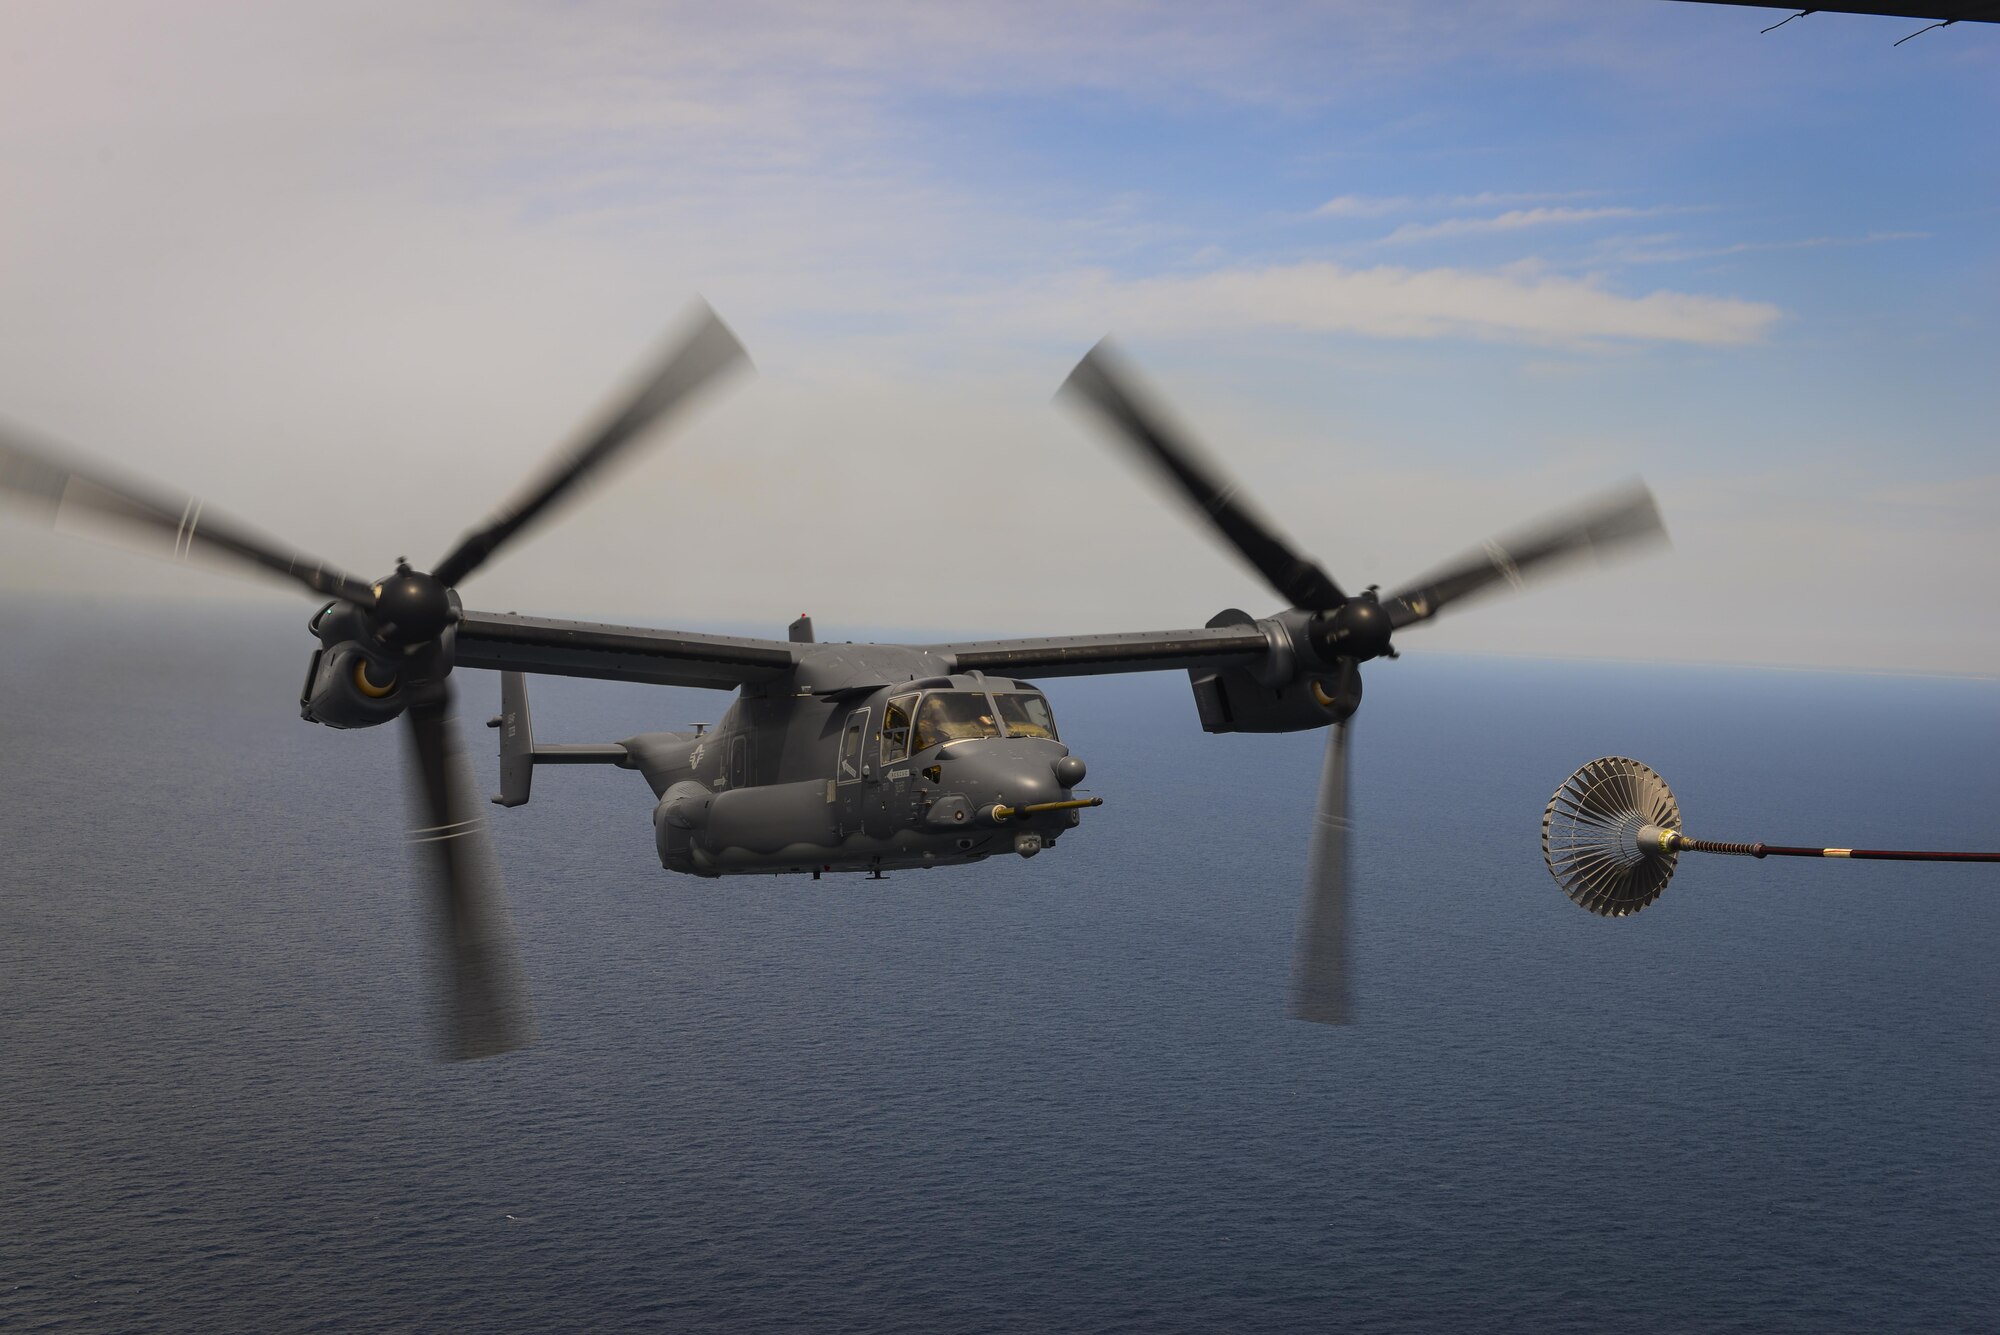 A CV-22 Osprey approaches an MC-130H Combat Talon II air-refueling receptacle during a training mission at Hurlburt Field, Fla., April 24, 2015. The Osprey is a tiltrotor aircraft that combines the vertical takeoff, hover and vertical landing qualities of a helicopter with the long-range, fuel efficiency and speed characteristics of a turboprop aircraft. (U.S. Air Force photo/Senior Airman Christopher Callaway)